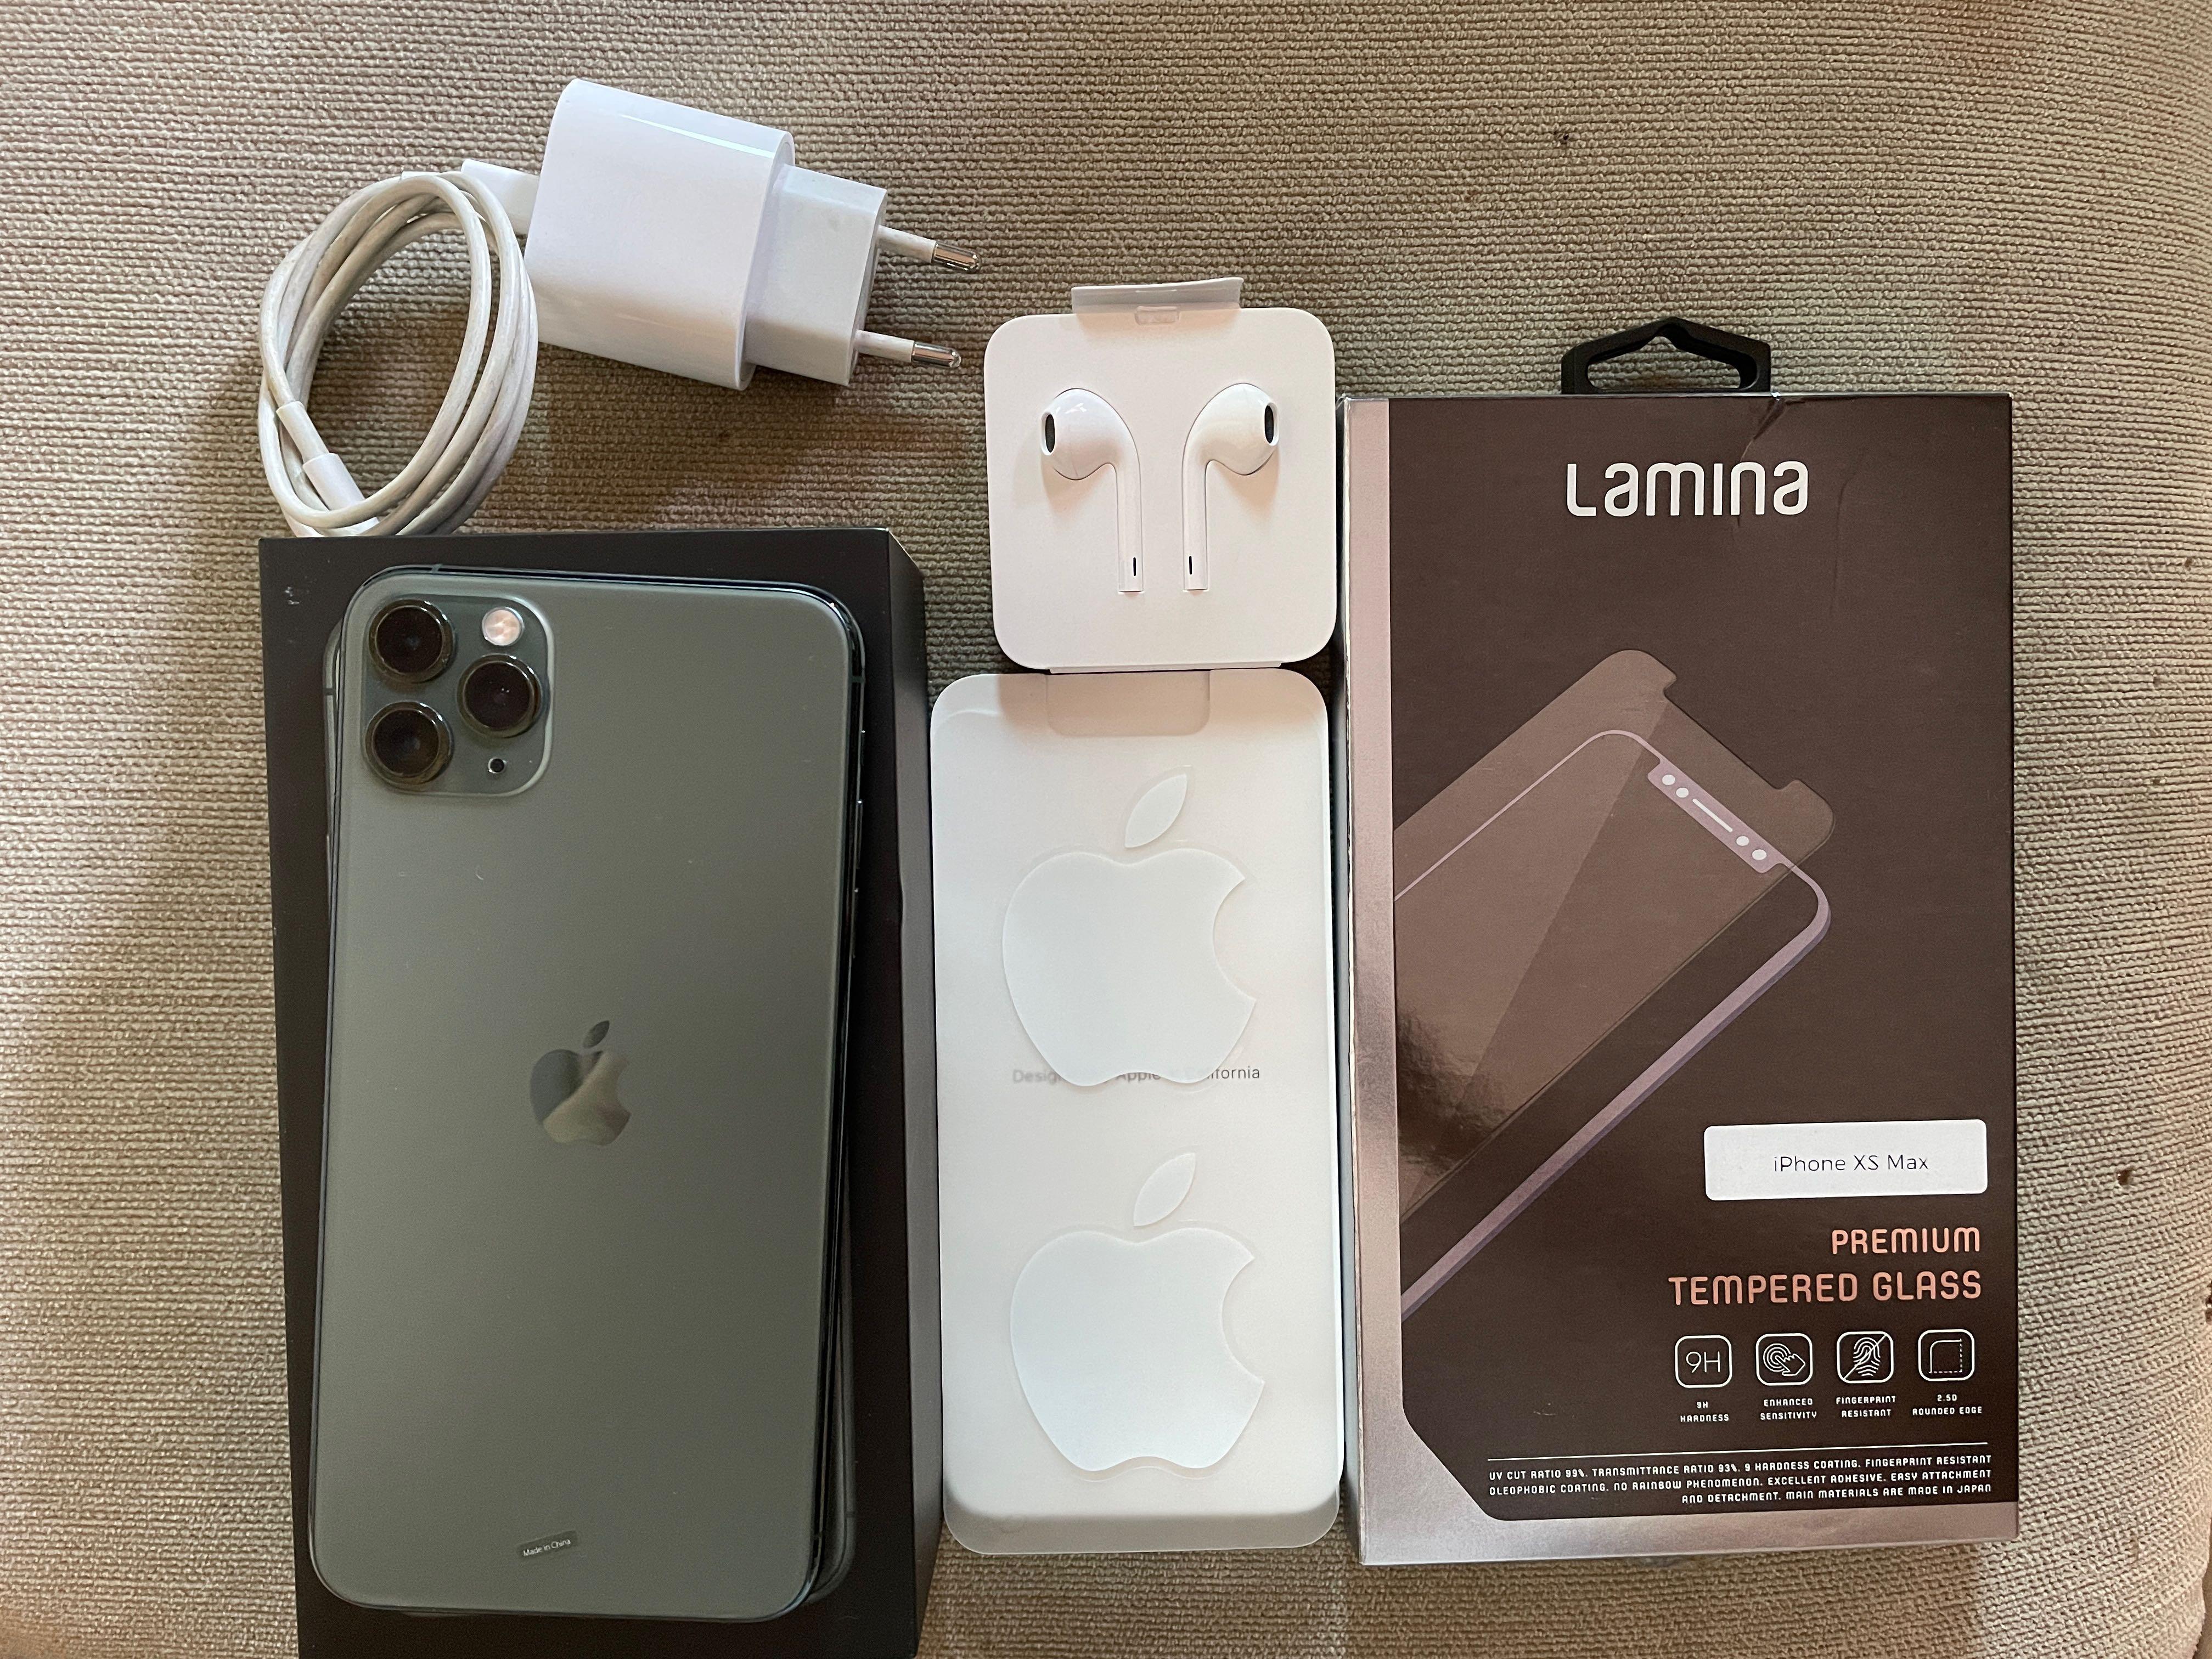 iPhone 11 Pro Max 64Gb Midnight Green ex IBOX, Telepon Seluler  Tablet,  iPhone, iPhone 11 Series di Carousell